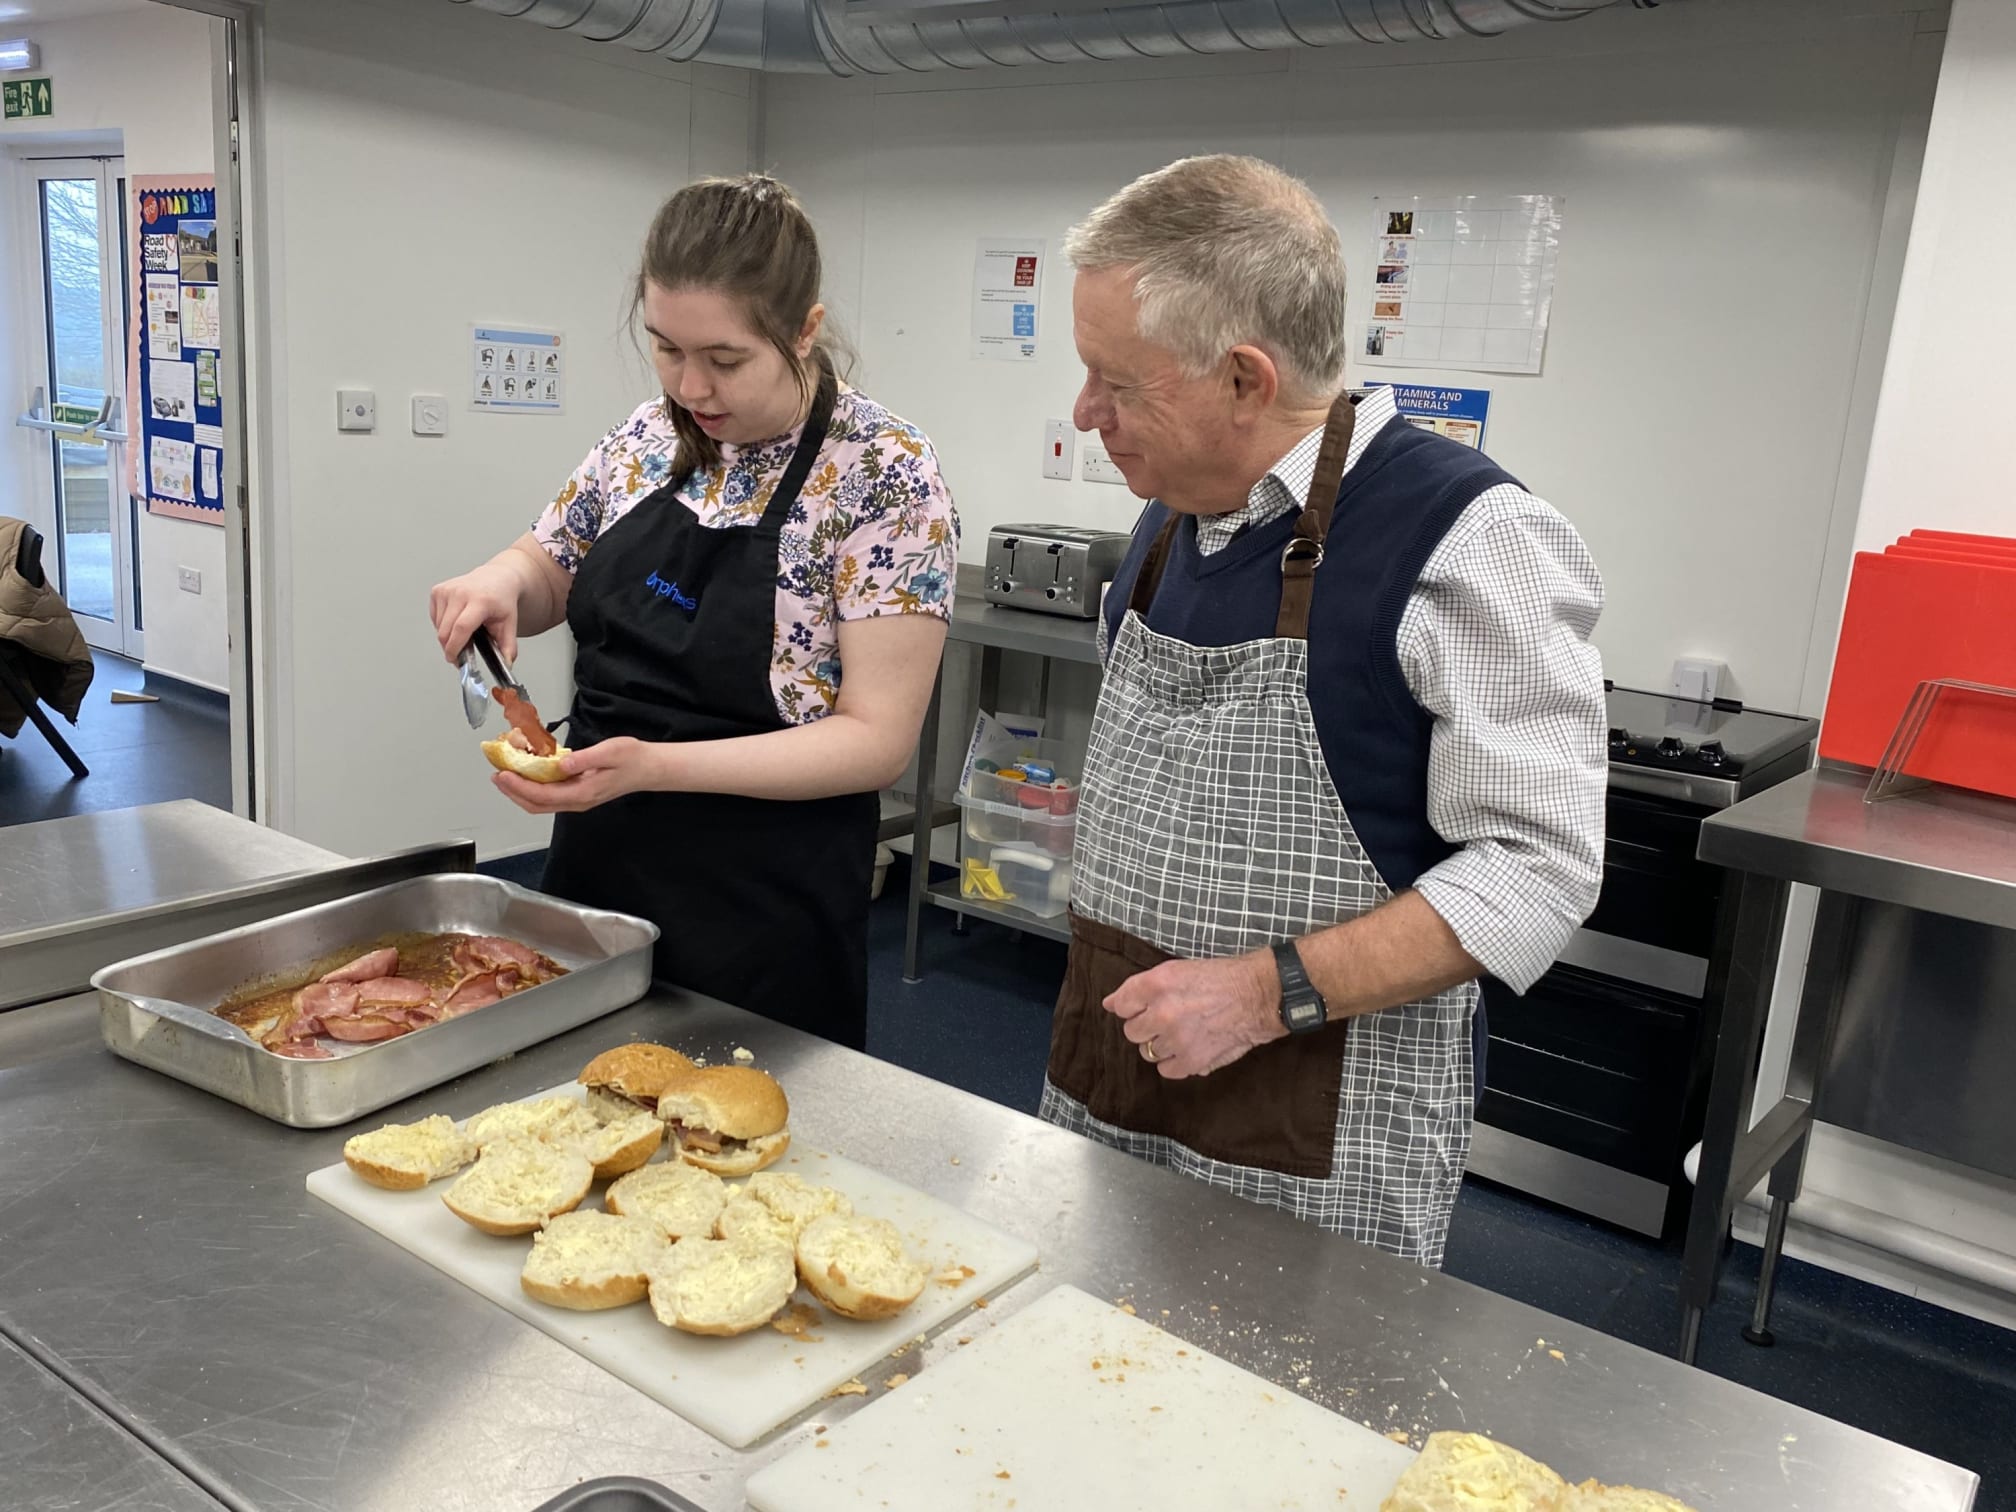 Orpheus student Lauren and volunteer Steve, both standing at a counter in the life skills kitchen, Steve assisting Lauren who is adding bacon to bread rolls